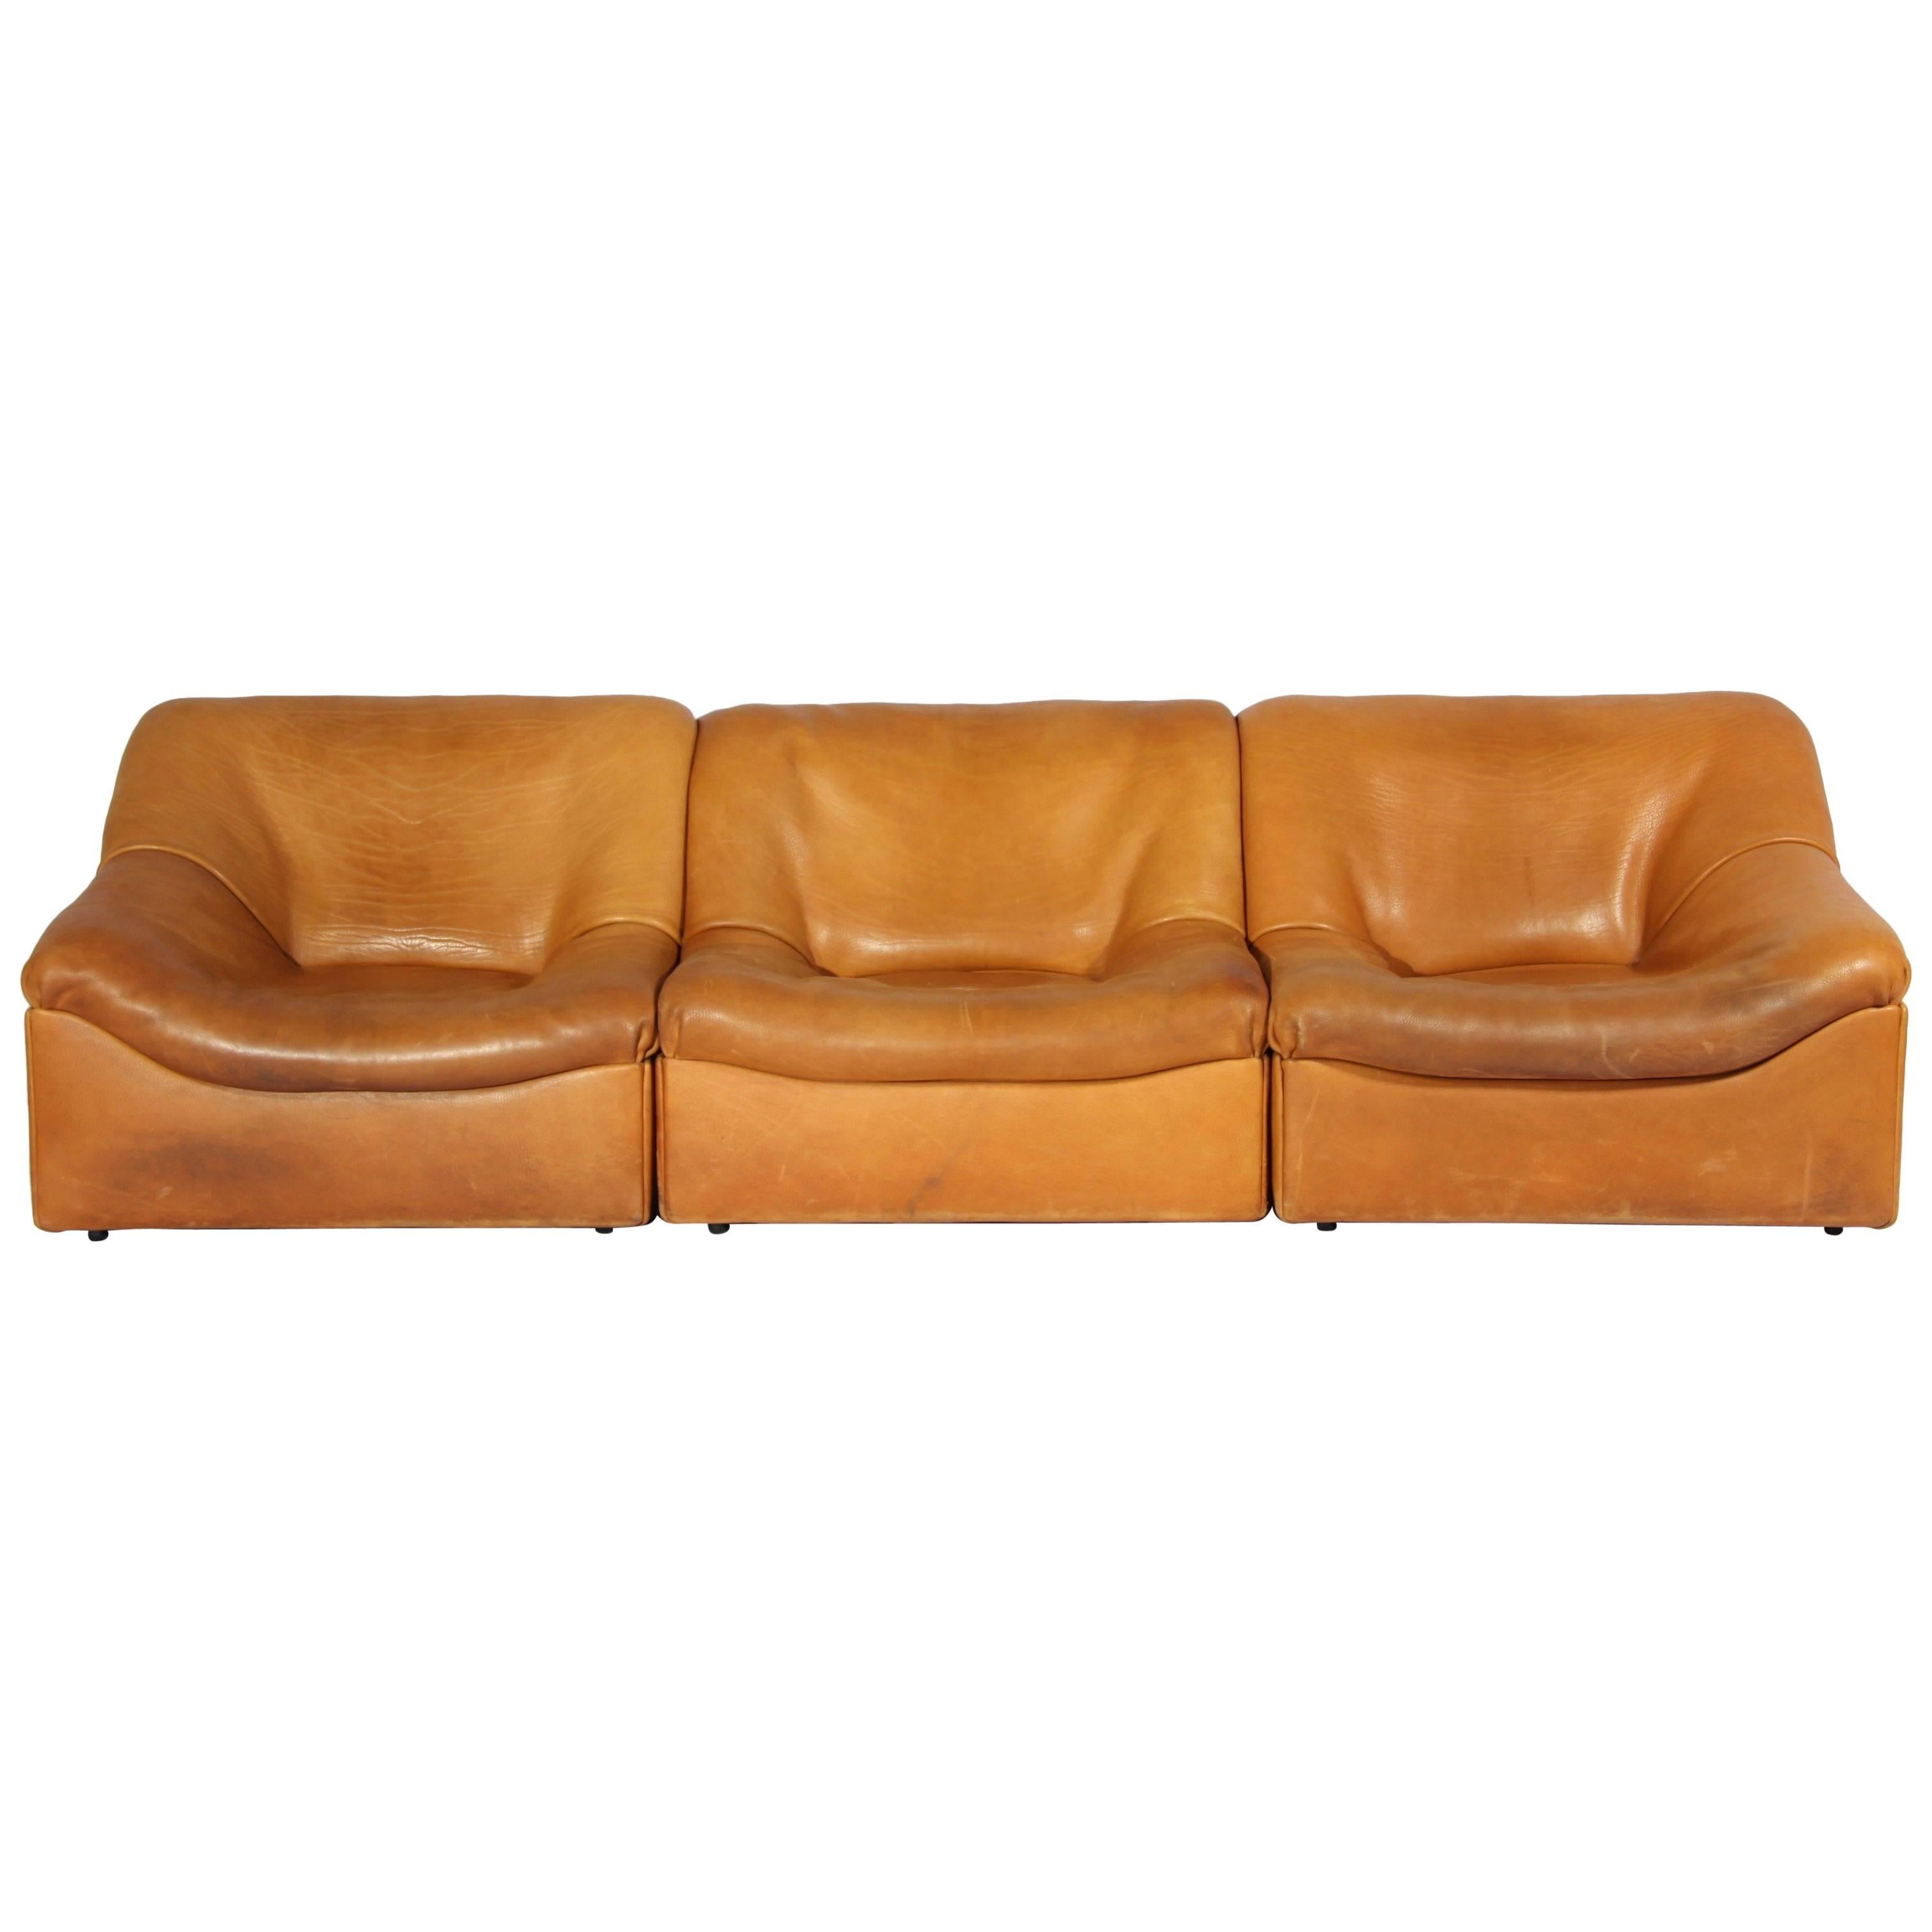 DS-46 Thick Buffalo Leather Lounging Chairs from De Sede, 1970s, Set of Six